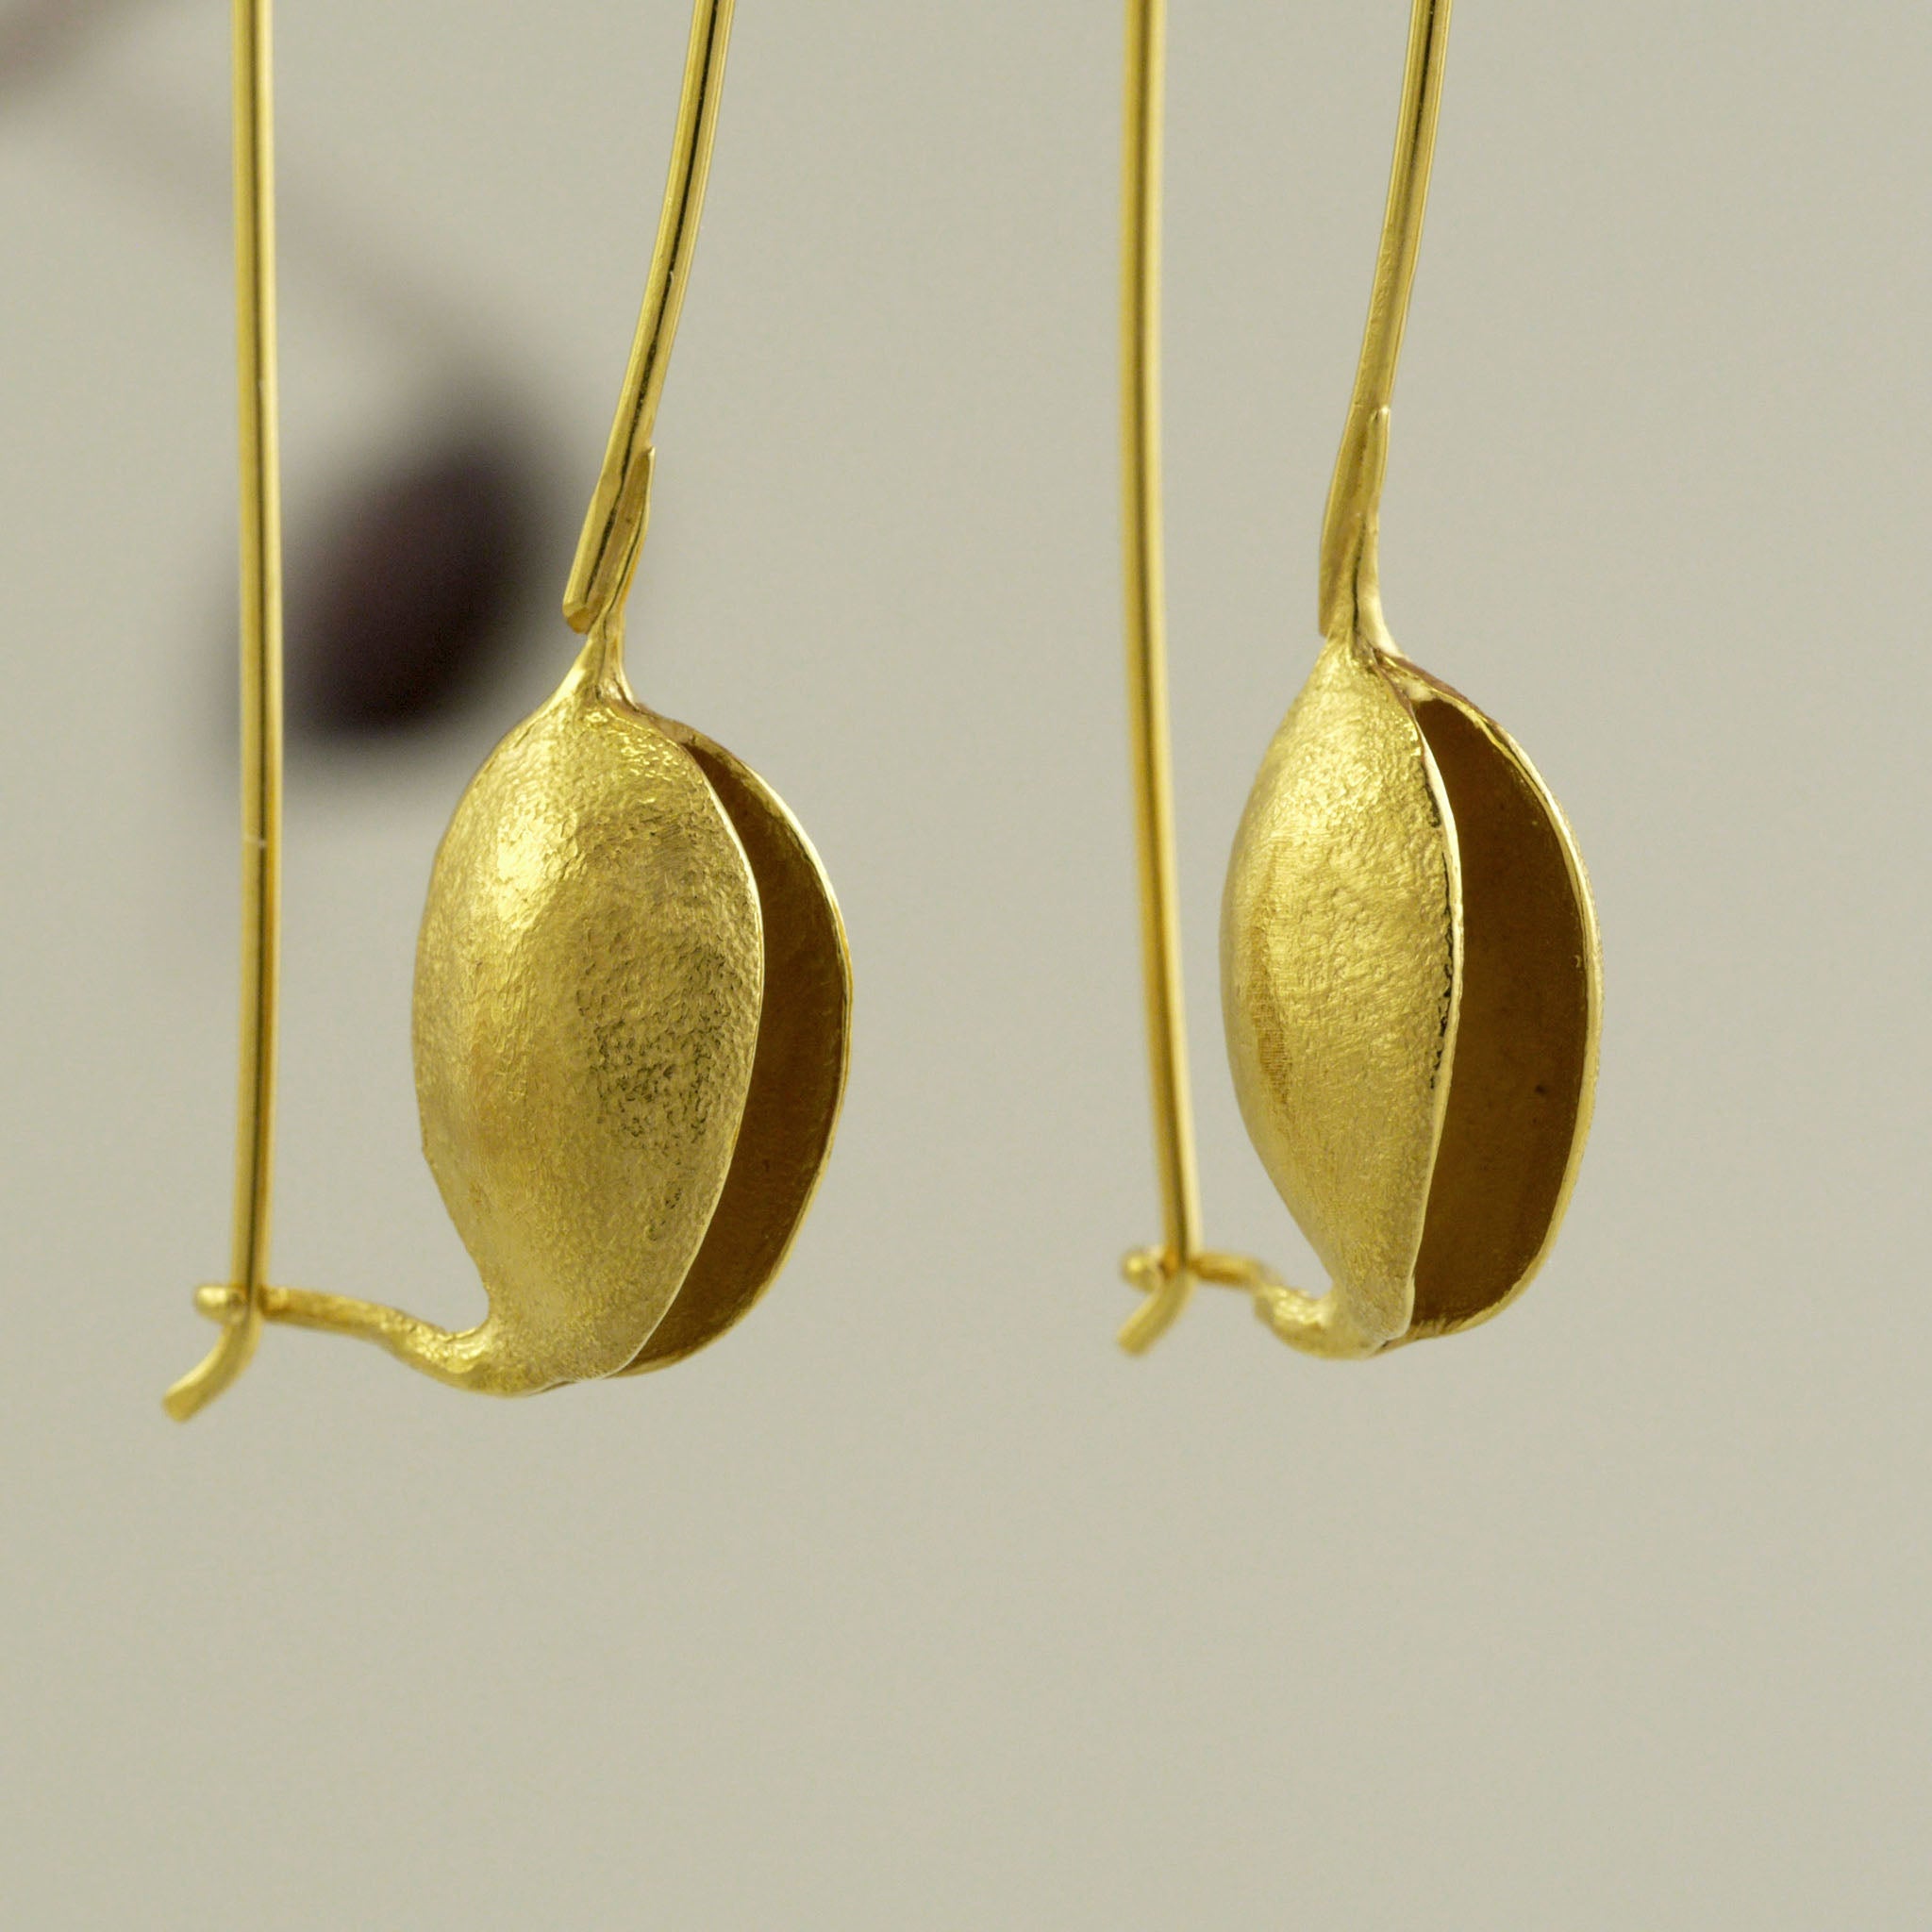 close up of Nature-inspired Gold drop earrings, replicating captivating dried seeds. Minimalistic, chic, and elegant, embodying natural beauty and femininity.